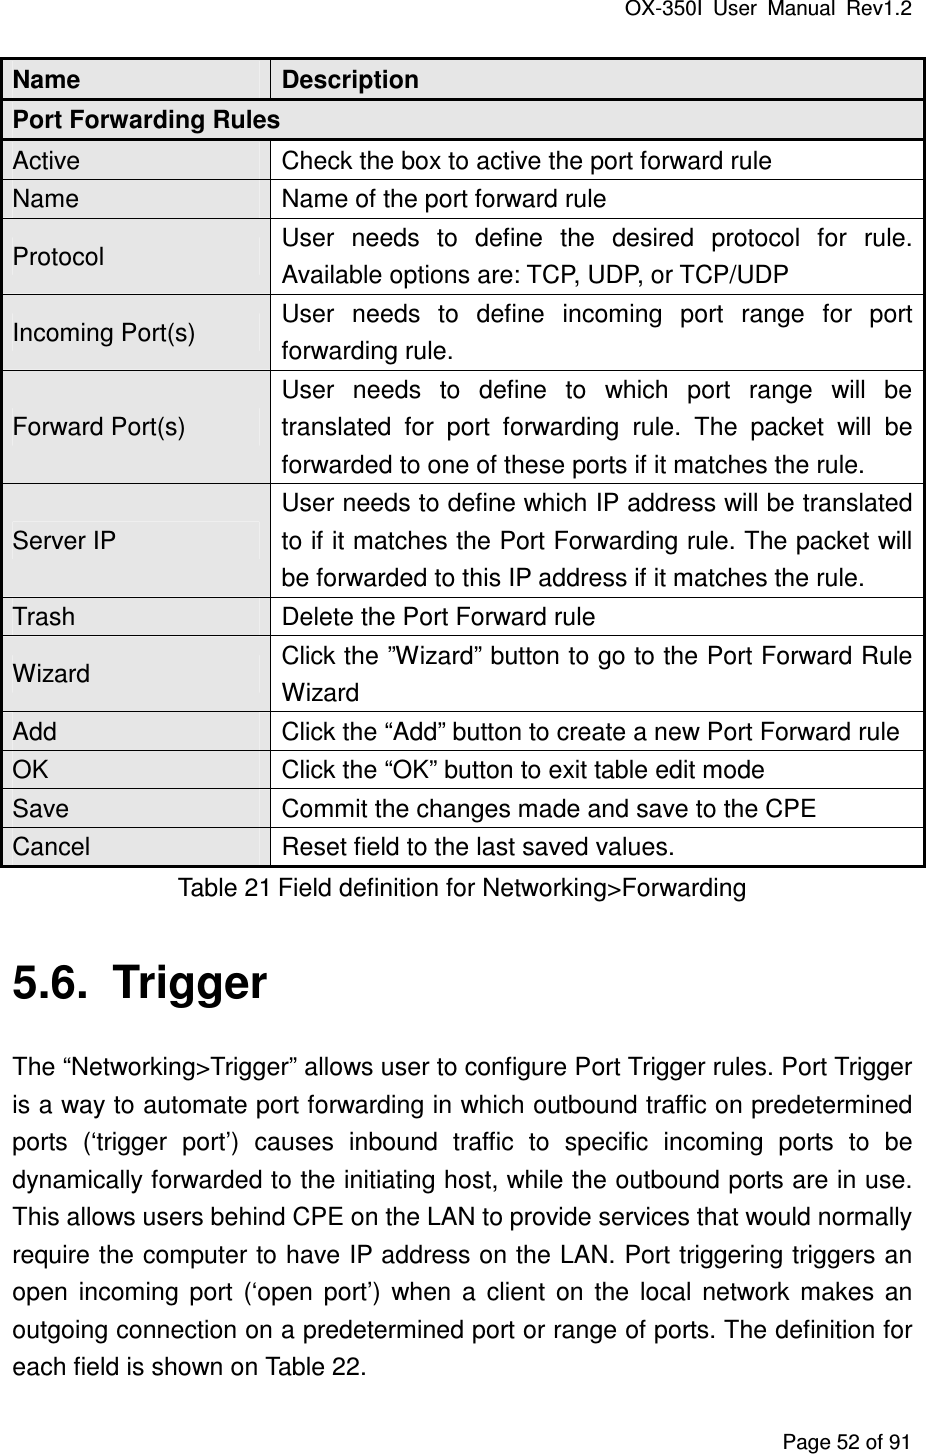 OX-350I  User  Manual  Rev1.2 Page 52 of 91 Name  Description Port Forwarding Rules Active  Check the box to active the port forward rule Name  Name of the port forward rule Protocol  User  needs  to  define  the  desired  protocol  for  rule. Available options are: TCP, UDP, or TCP/UDP Incoming Port(s)  User  needs  to  define  incoming  port  range  for  port forwarding rule. Forward Port(s) User  needs  to  define  to  which  port  range  will  be translated  for  port  forwarding  rule.  The  packet  will  be forwarded to one of these ports if it matches the rule. Server IP User needs to define which IP address will be translated to if it matches the Port Forwarding rule. The packet will be forwarded to this IP address if it matches the rule. Trash  Delete the Port Forward rule Wizard  Click the ”Wizard” button to go to the Port Forward Rule Wizard Add  Click the “Add” button to create a new Port Forward rule OK  Click the “OK” button to exit table edit mode Save  Commit the changes made and save to the CPE Cancel  Reset field to the last saved values. Table 21 Field definition for Networking&gt;Forwarding 5.6.  Trigger The “Networking&gt;Trigger” allows user to configure Port Trigger rules. Port Trigger is a way to automate port forwarding in which outbound traffic on predetermined ports  (‘trigger  port’)  causes  inbound  traffic  to  specific  incoming  ports  to  be dynamically forwarded to the initiating host, while the outbound ports are in use. This allows users behind CPE on the LAN to provide services that would normally require the computer to have IP address on the LAN. Port triggering triggers an open  incoming  port  (‘open  port’)  when  a  client  on  the  local  network  makes  an outgoing connection on a predetermined port or range of ports. The definition for each field is shown on Table 22. 